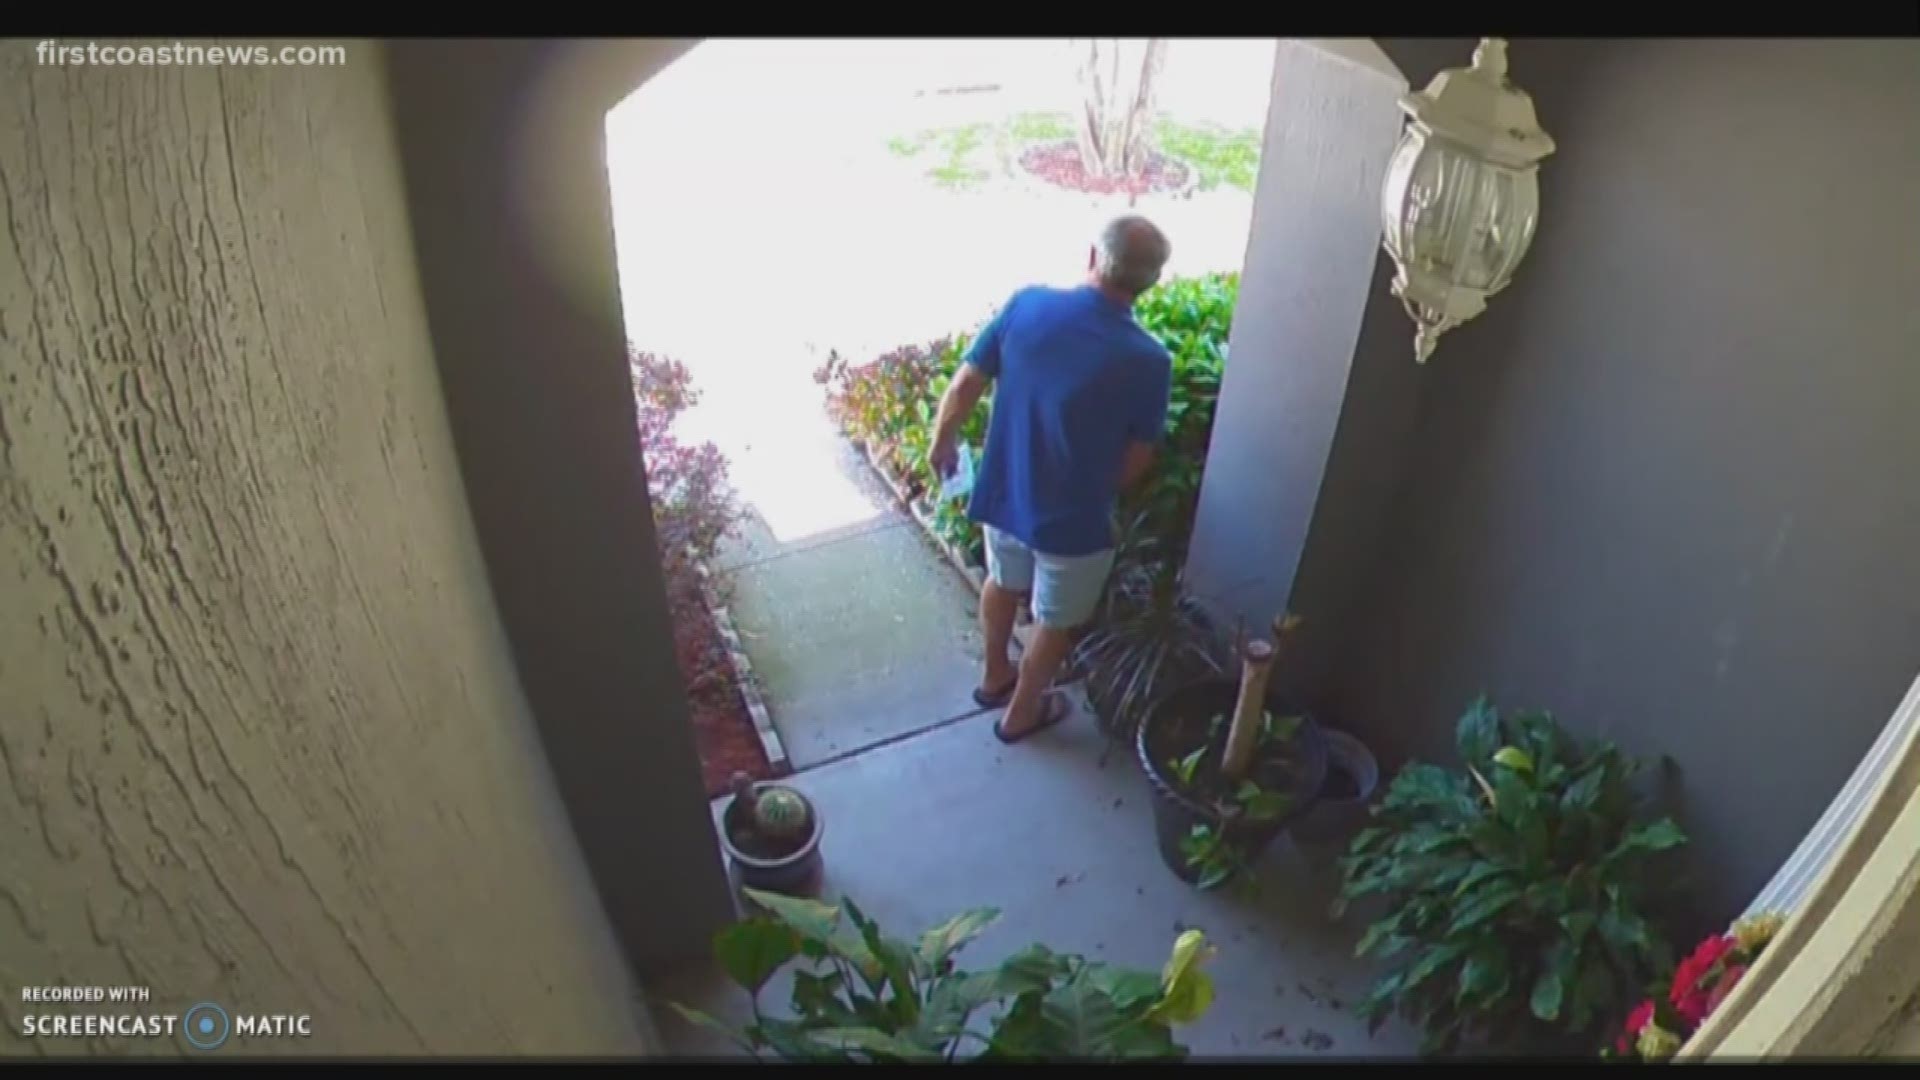 The roofing company left a business card, then decided to go pee in the man's bushes.